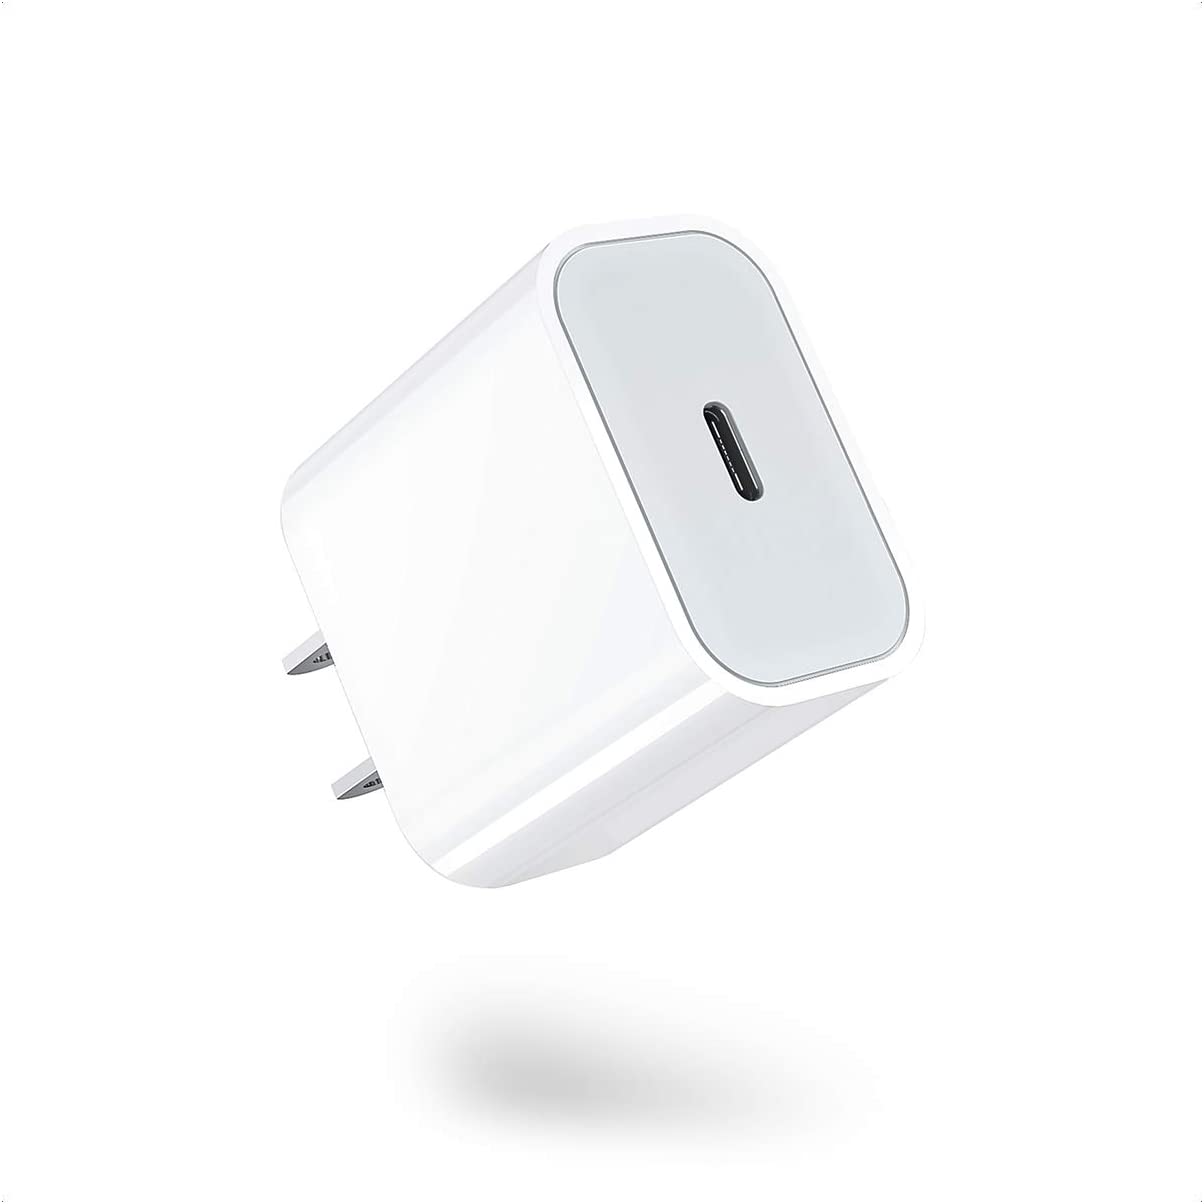 iPhone 12 Charger, Amoner 20W USB C Charger for iPhone 12/12 Mini